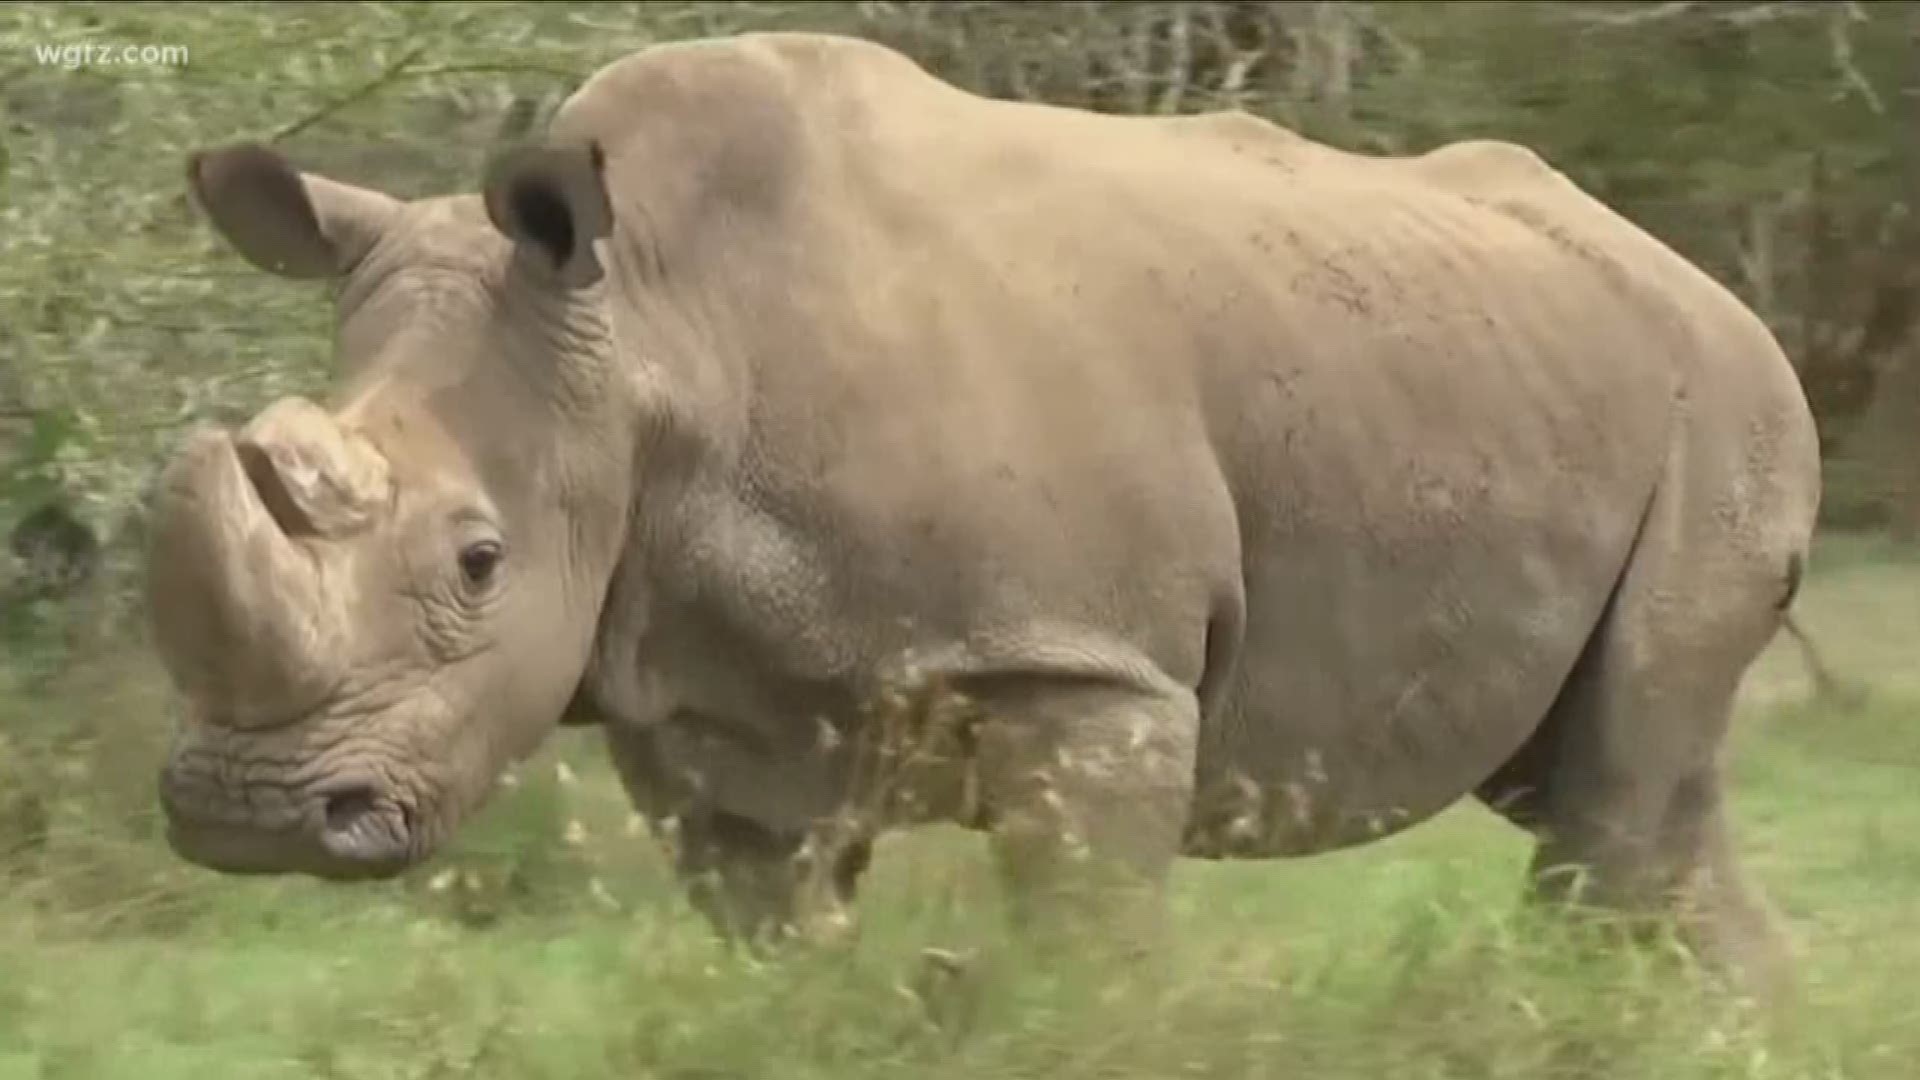 Northern White Rhinos are on the verge of extinction.